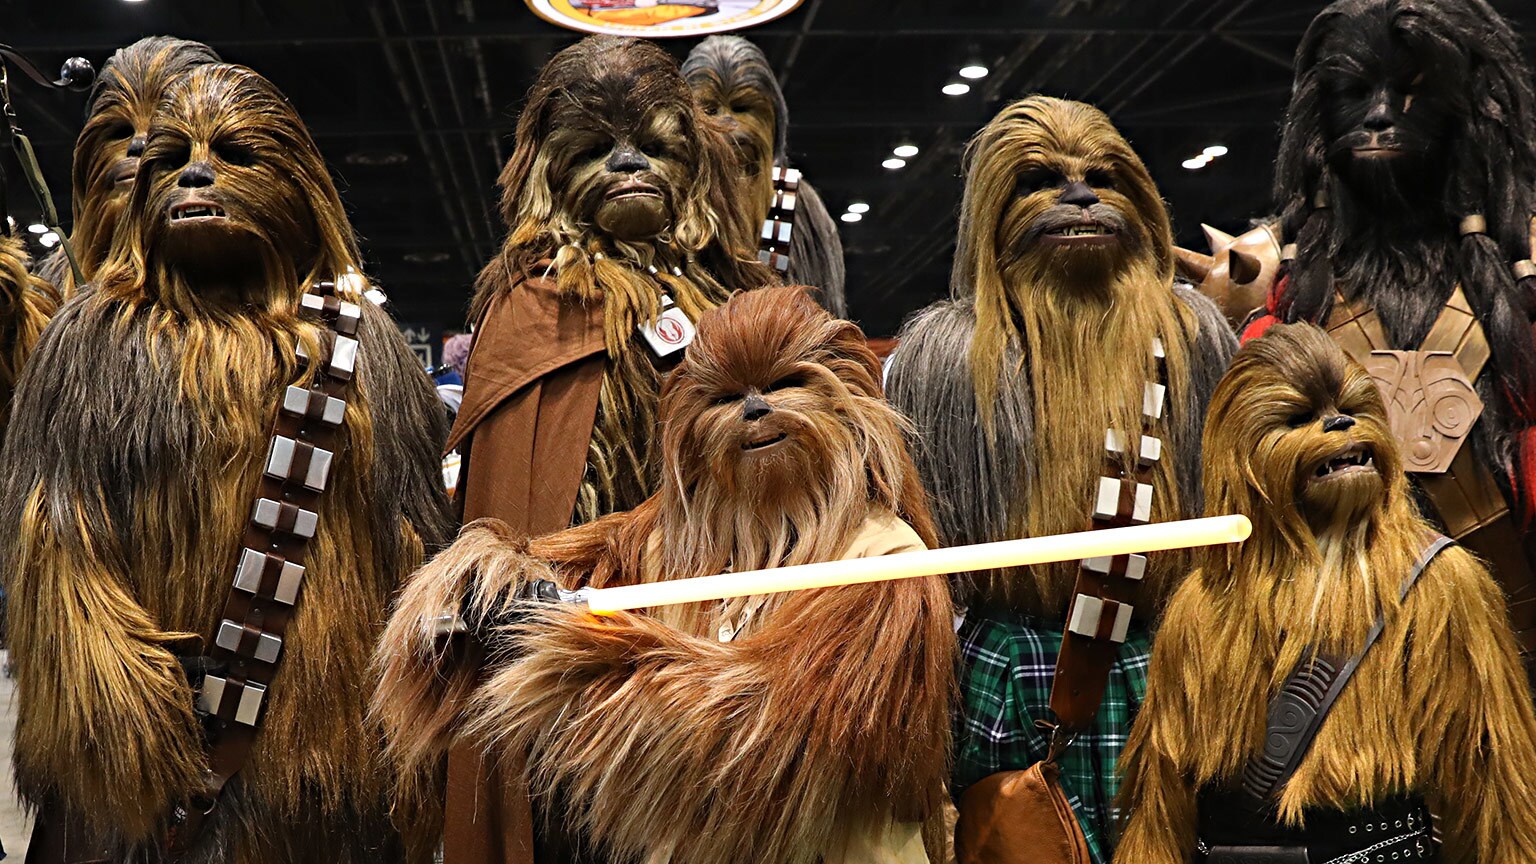 Wookiee cosplayers posing at Star Wars Celebration